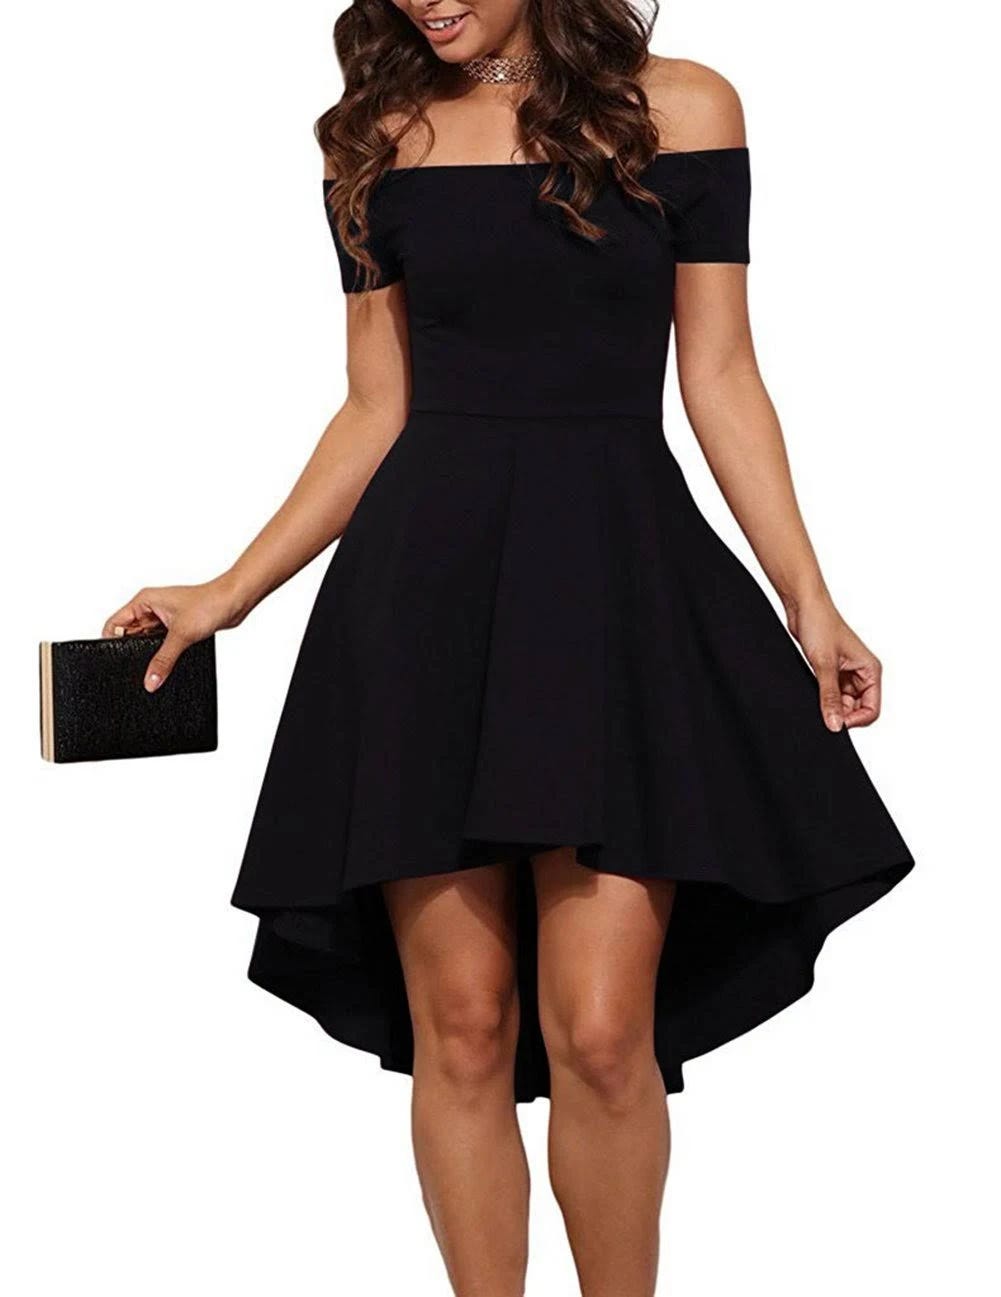 Chic off-shoulder skater dress for prom and cocktail events | Image